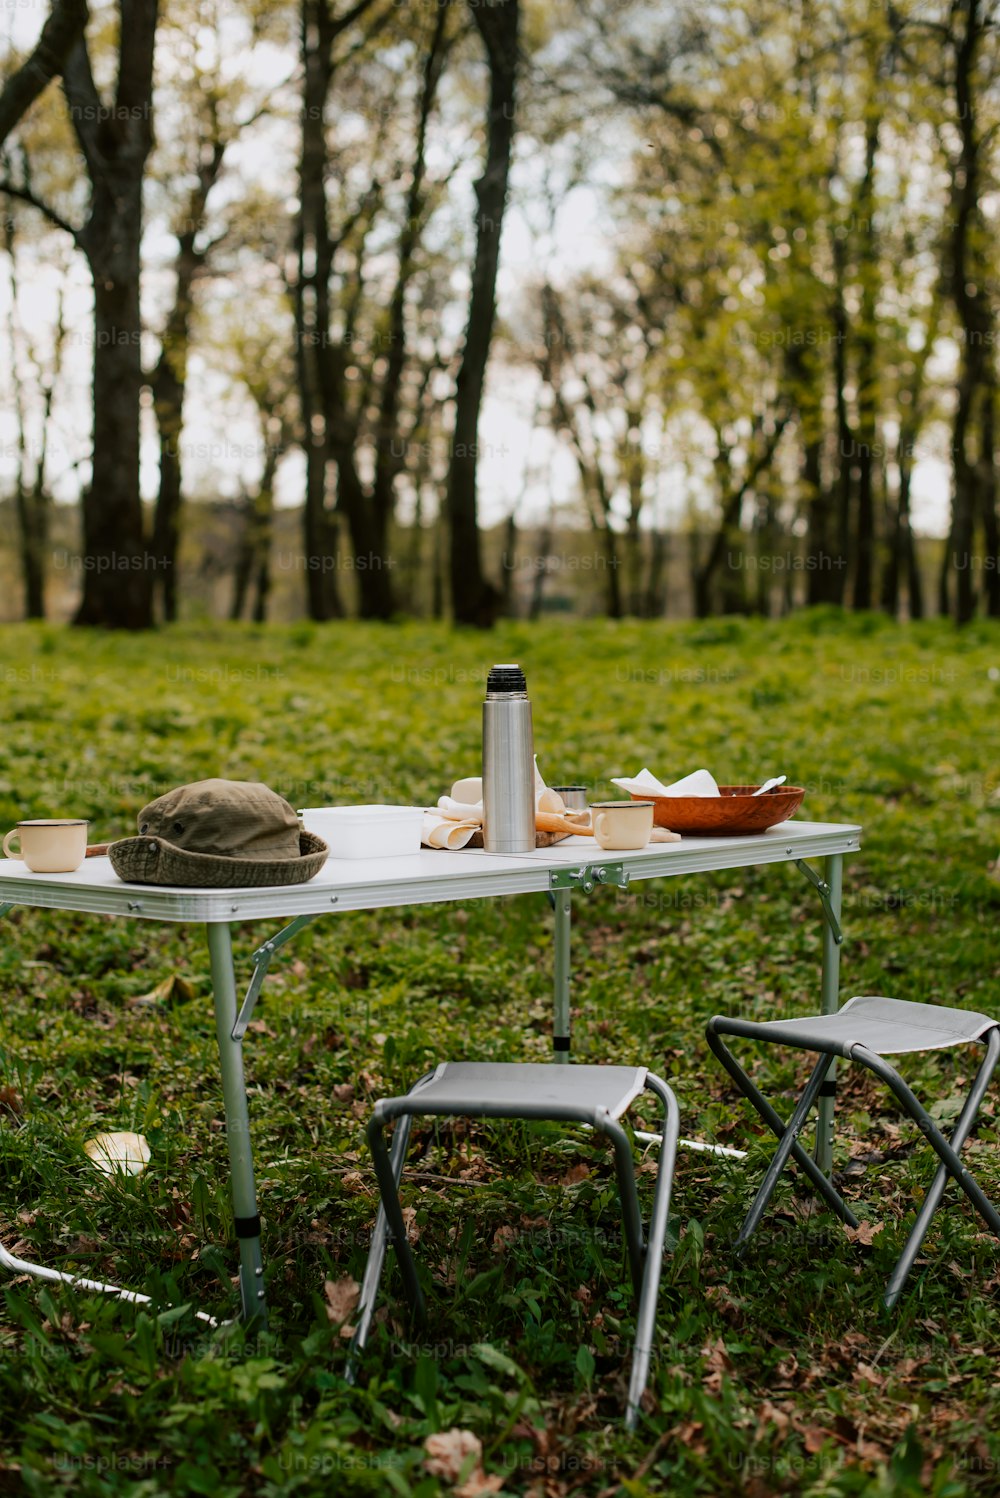 a picnic table set up in the middle of a field